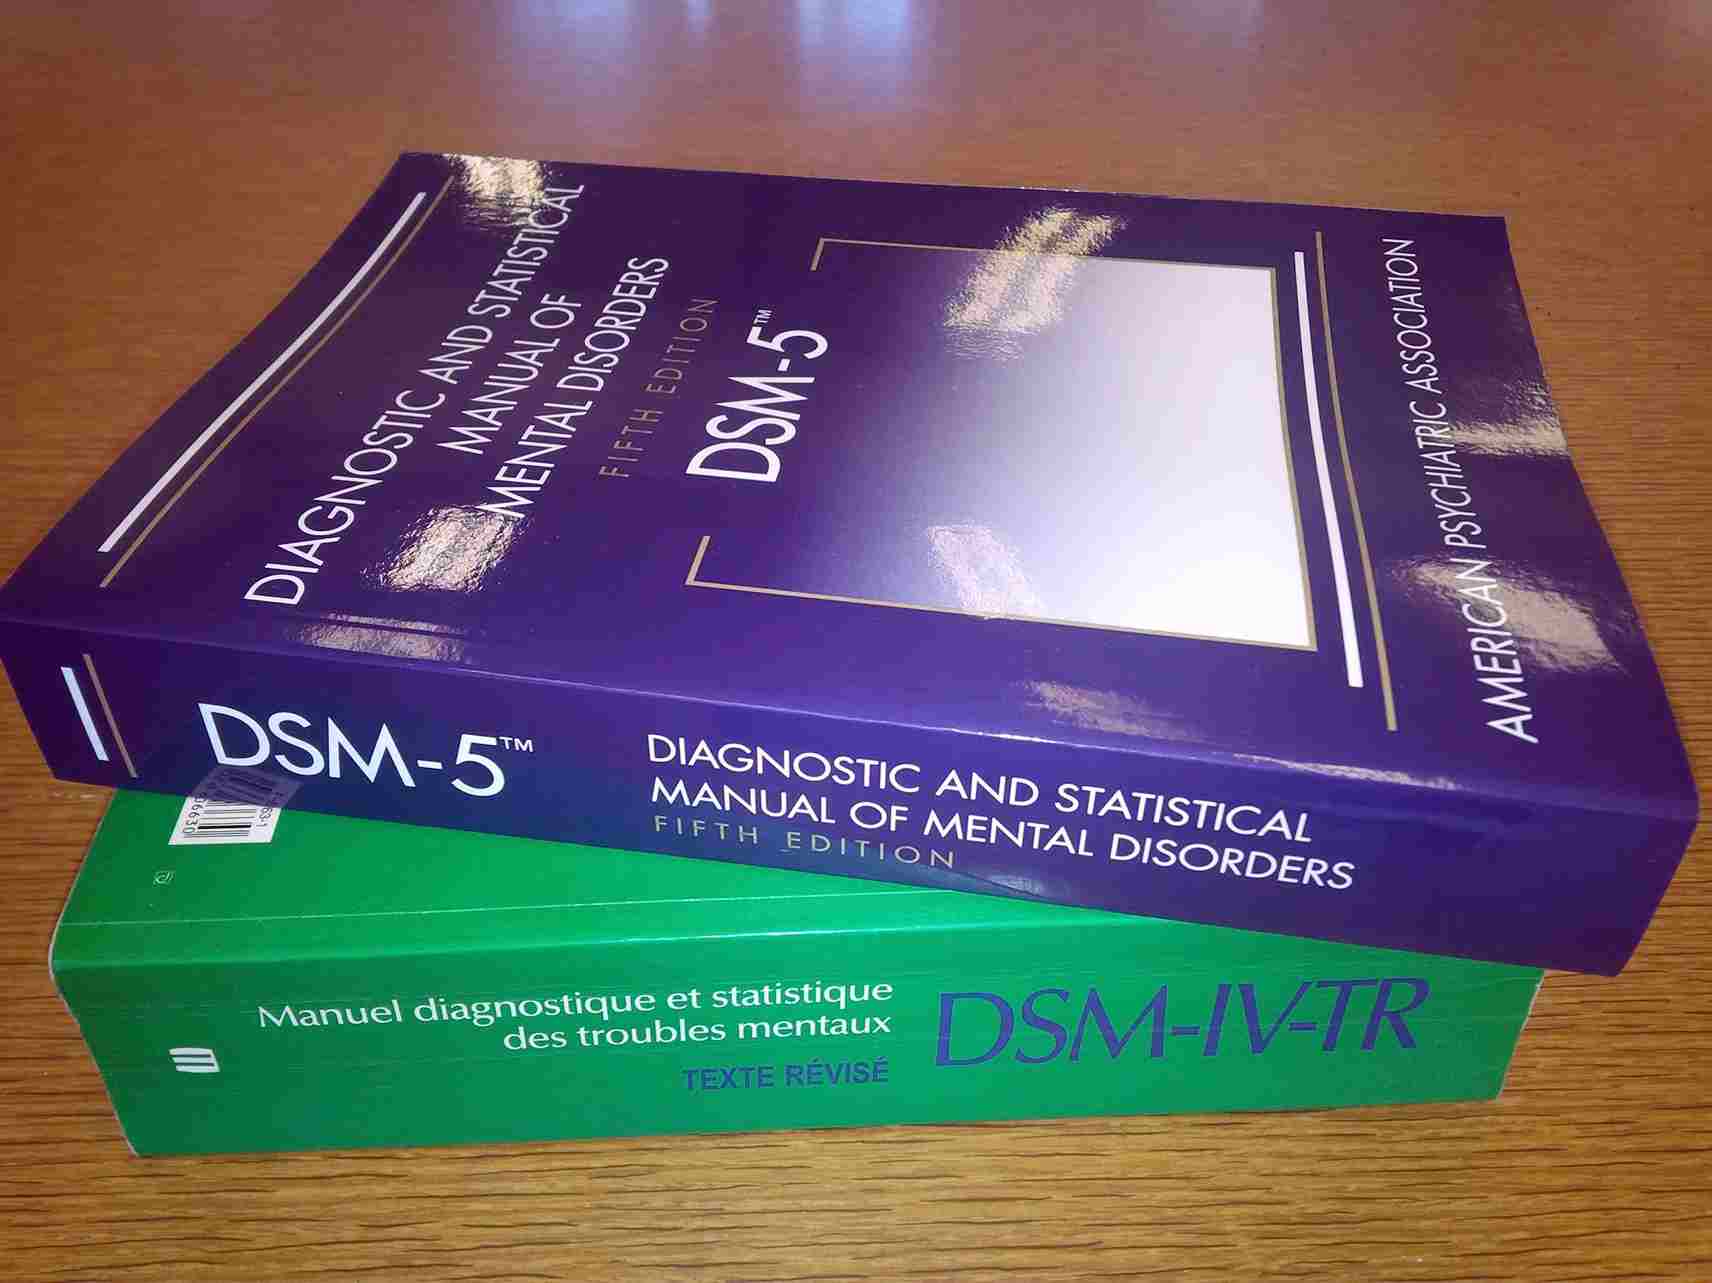 Frequently Asked Questions About DSM-5